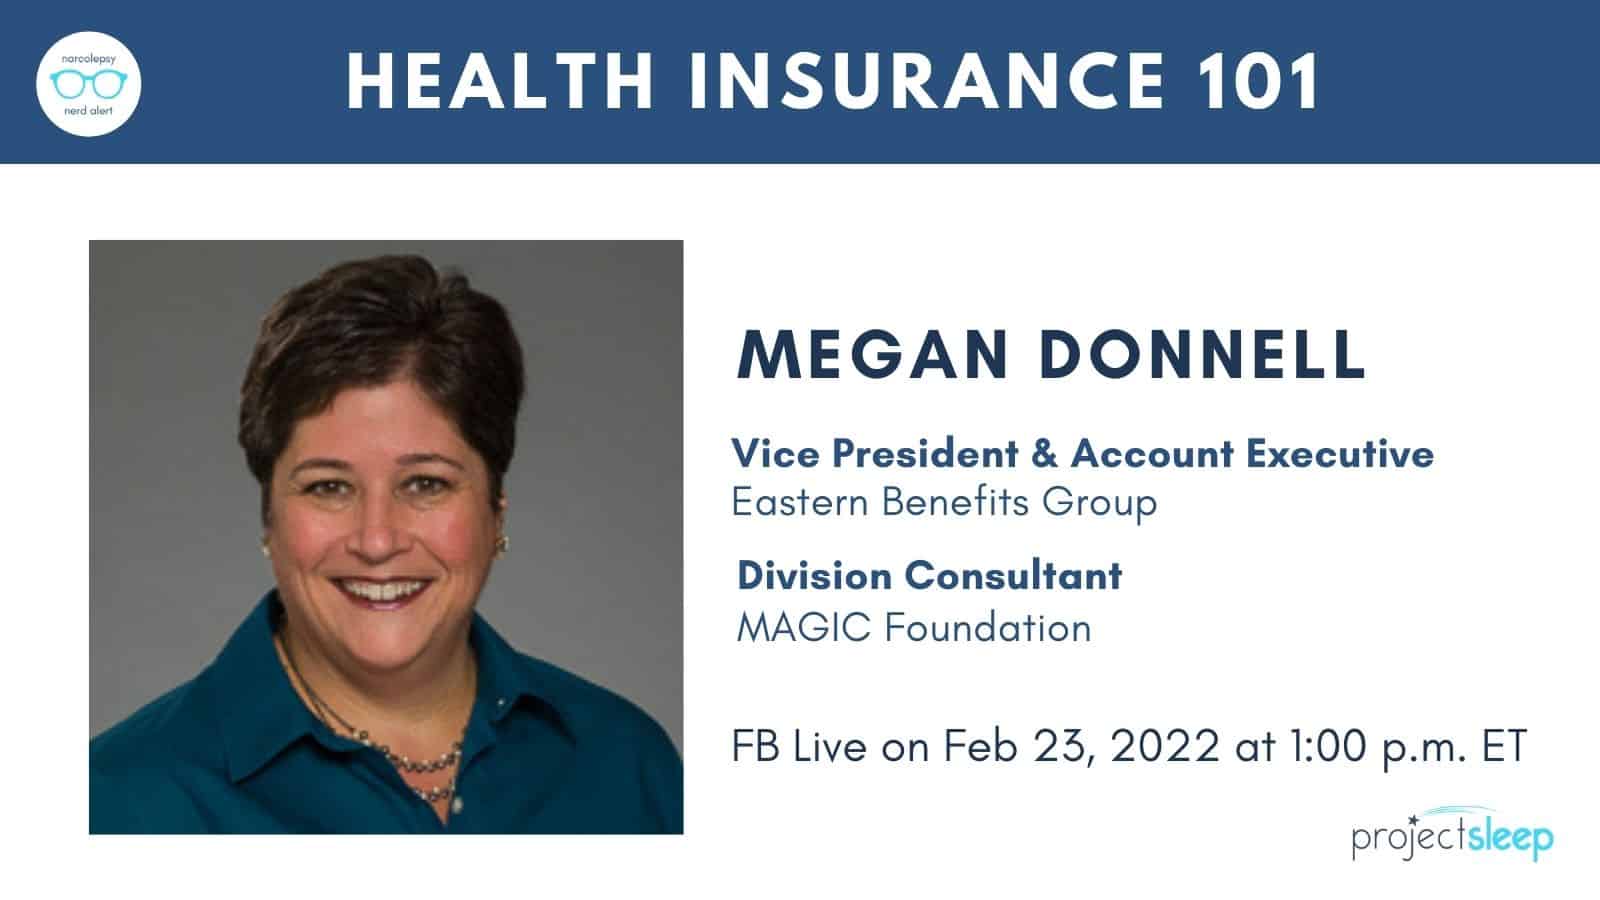 Megan Donnell Health Insurance 101 narcolepsy